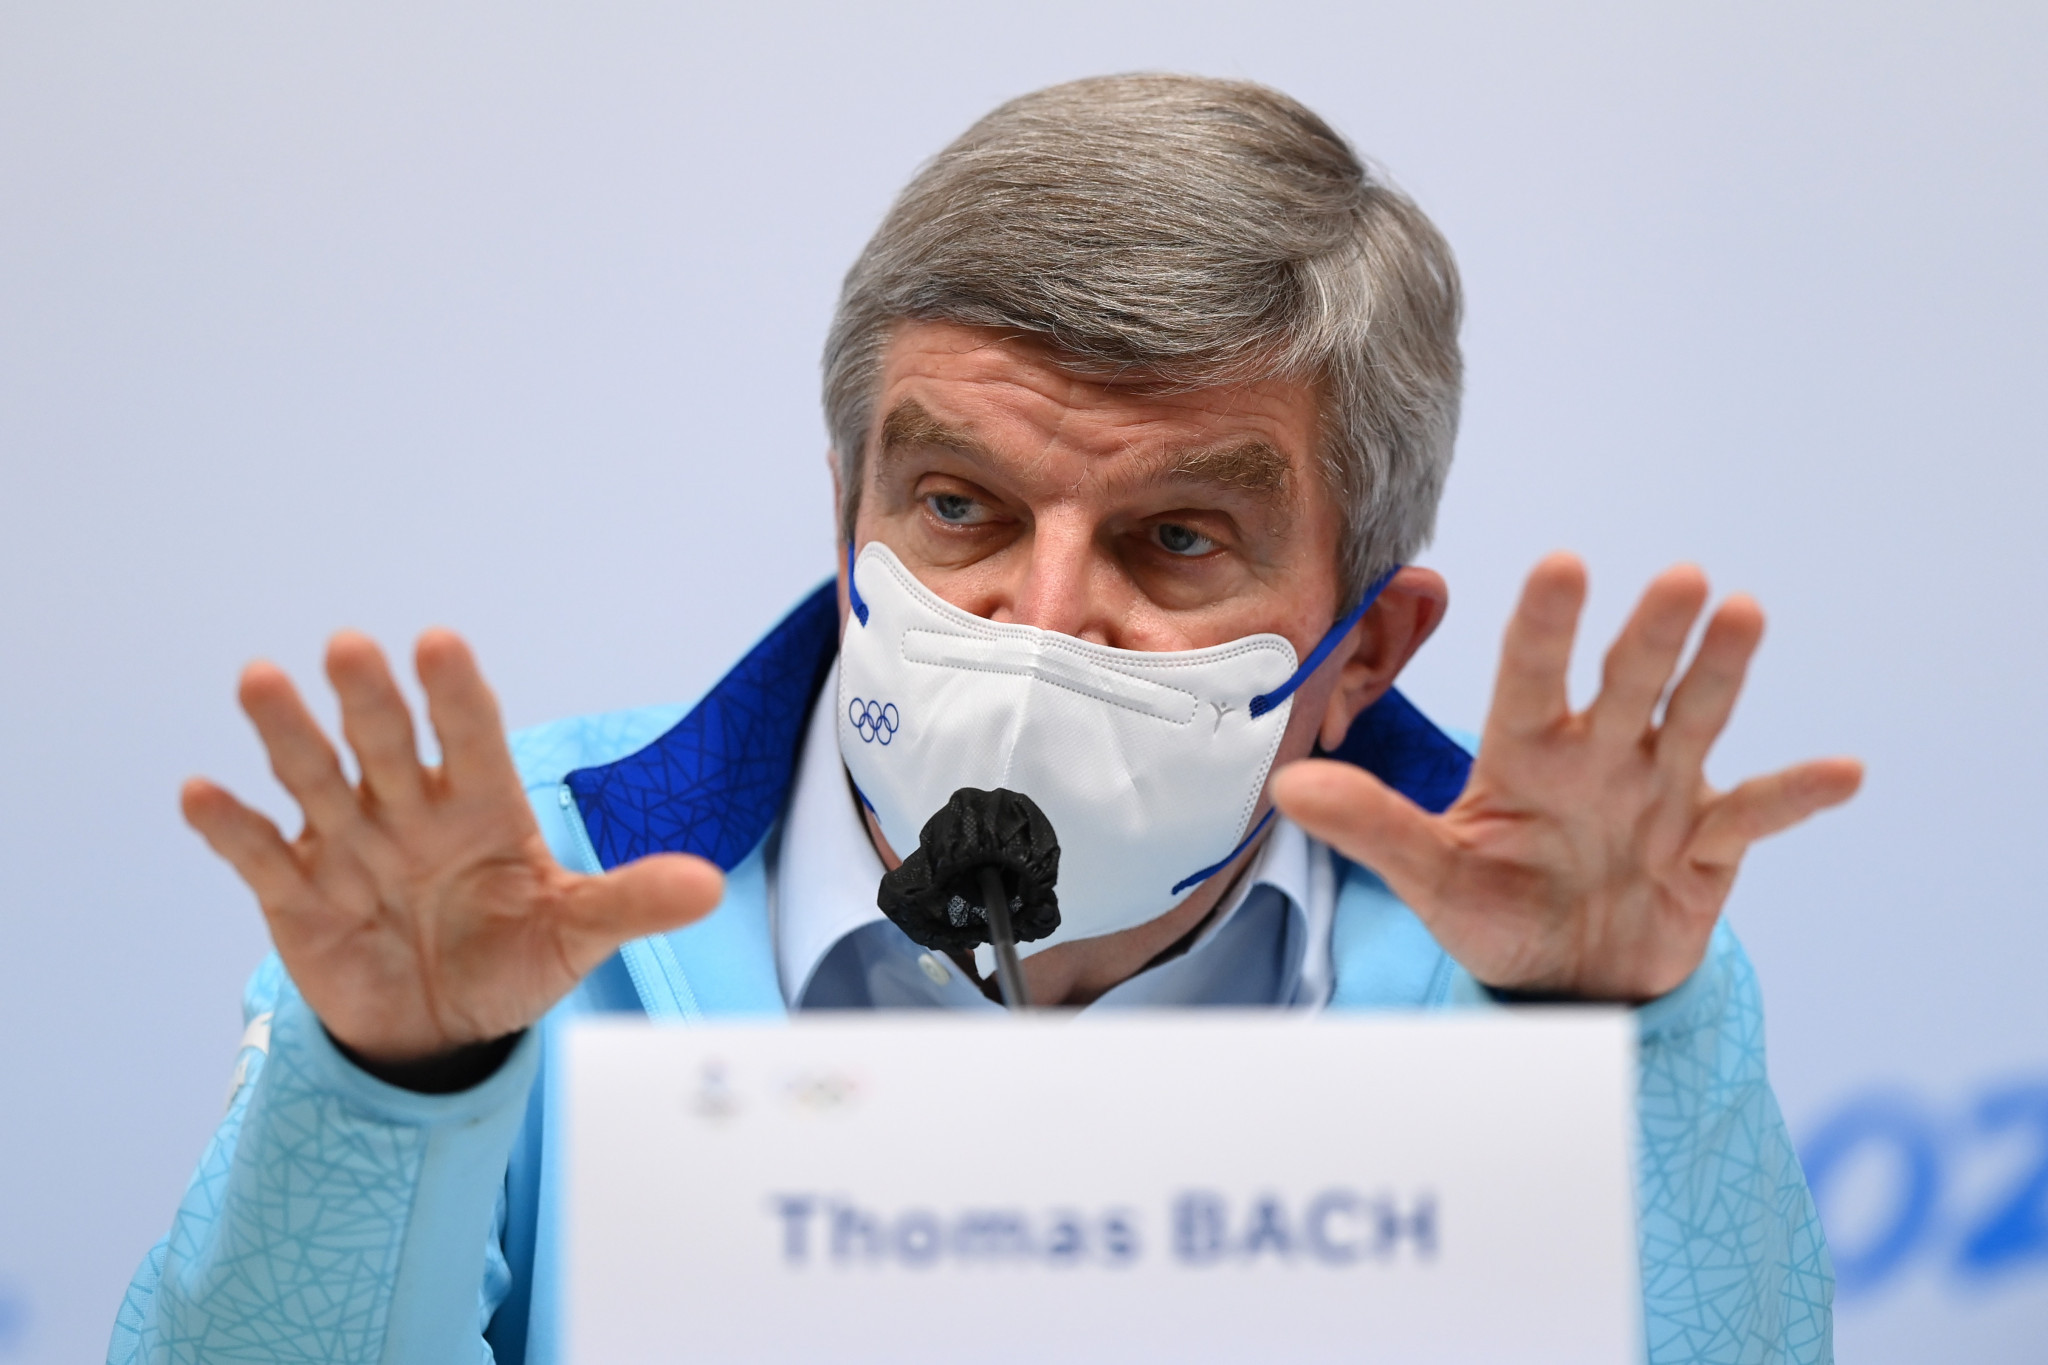 IOC President Thomas Bach has confirmed that age limits had been discussed by the organisation's Executive Board ©Getty Images